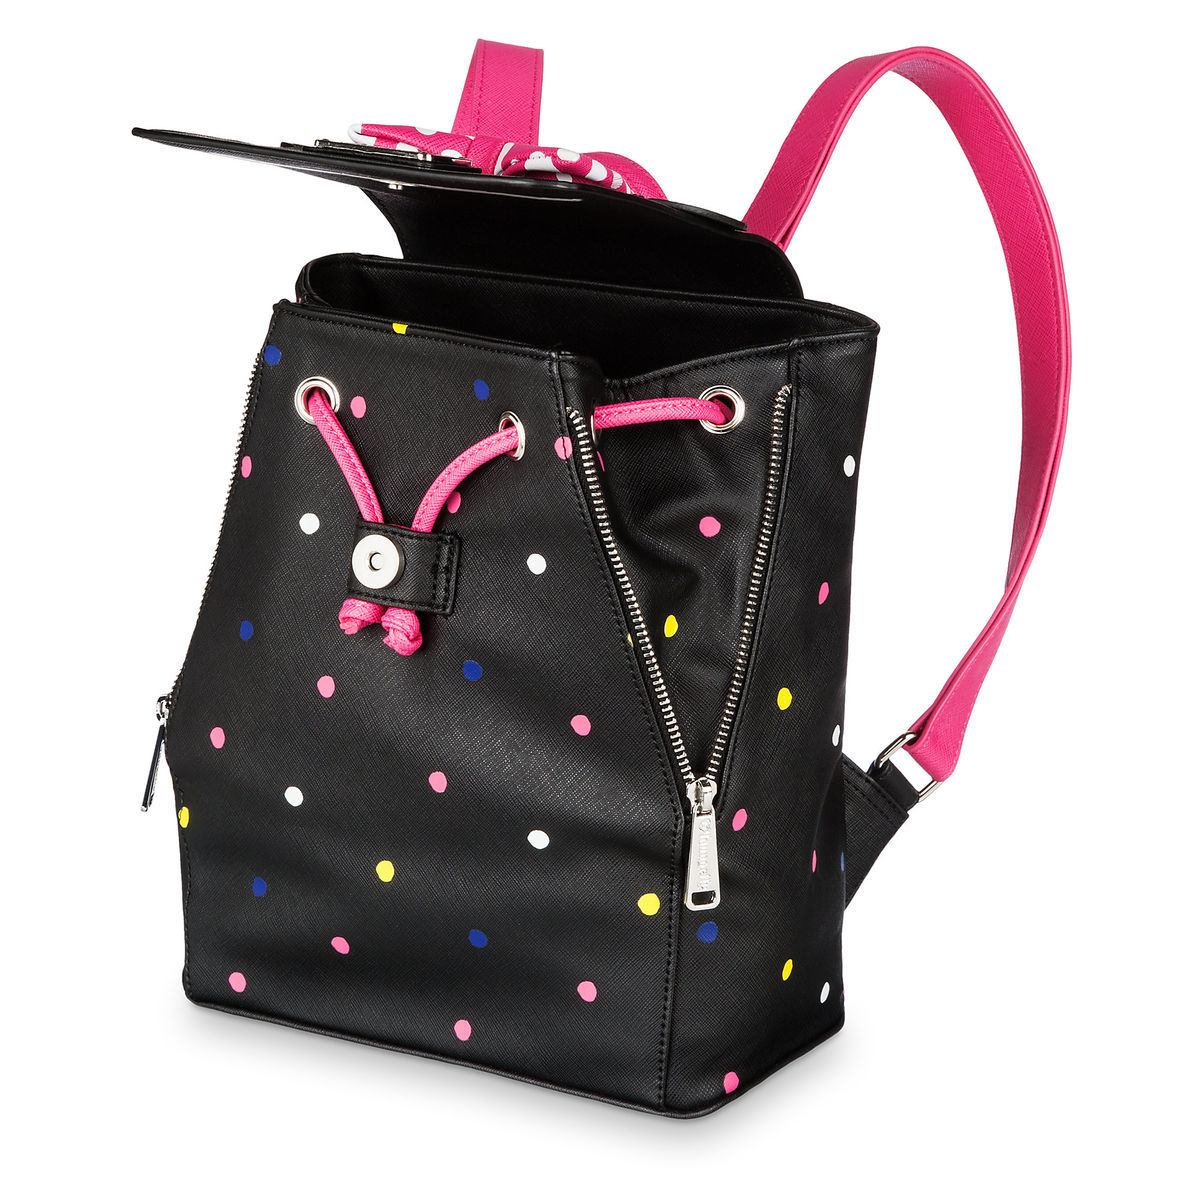 Disney Parks Minnie Mouse Mini Backpack by Loungefly Polka Dot New